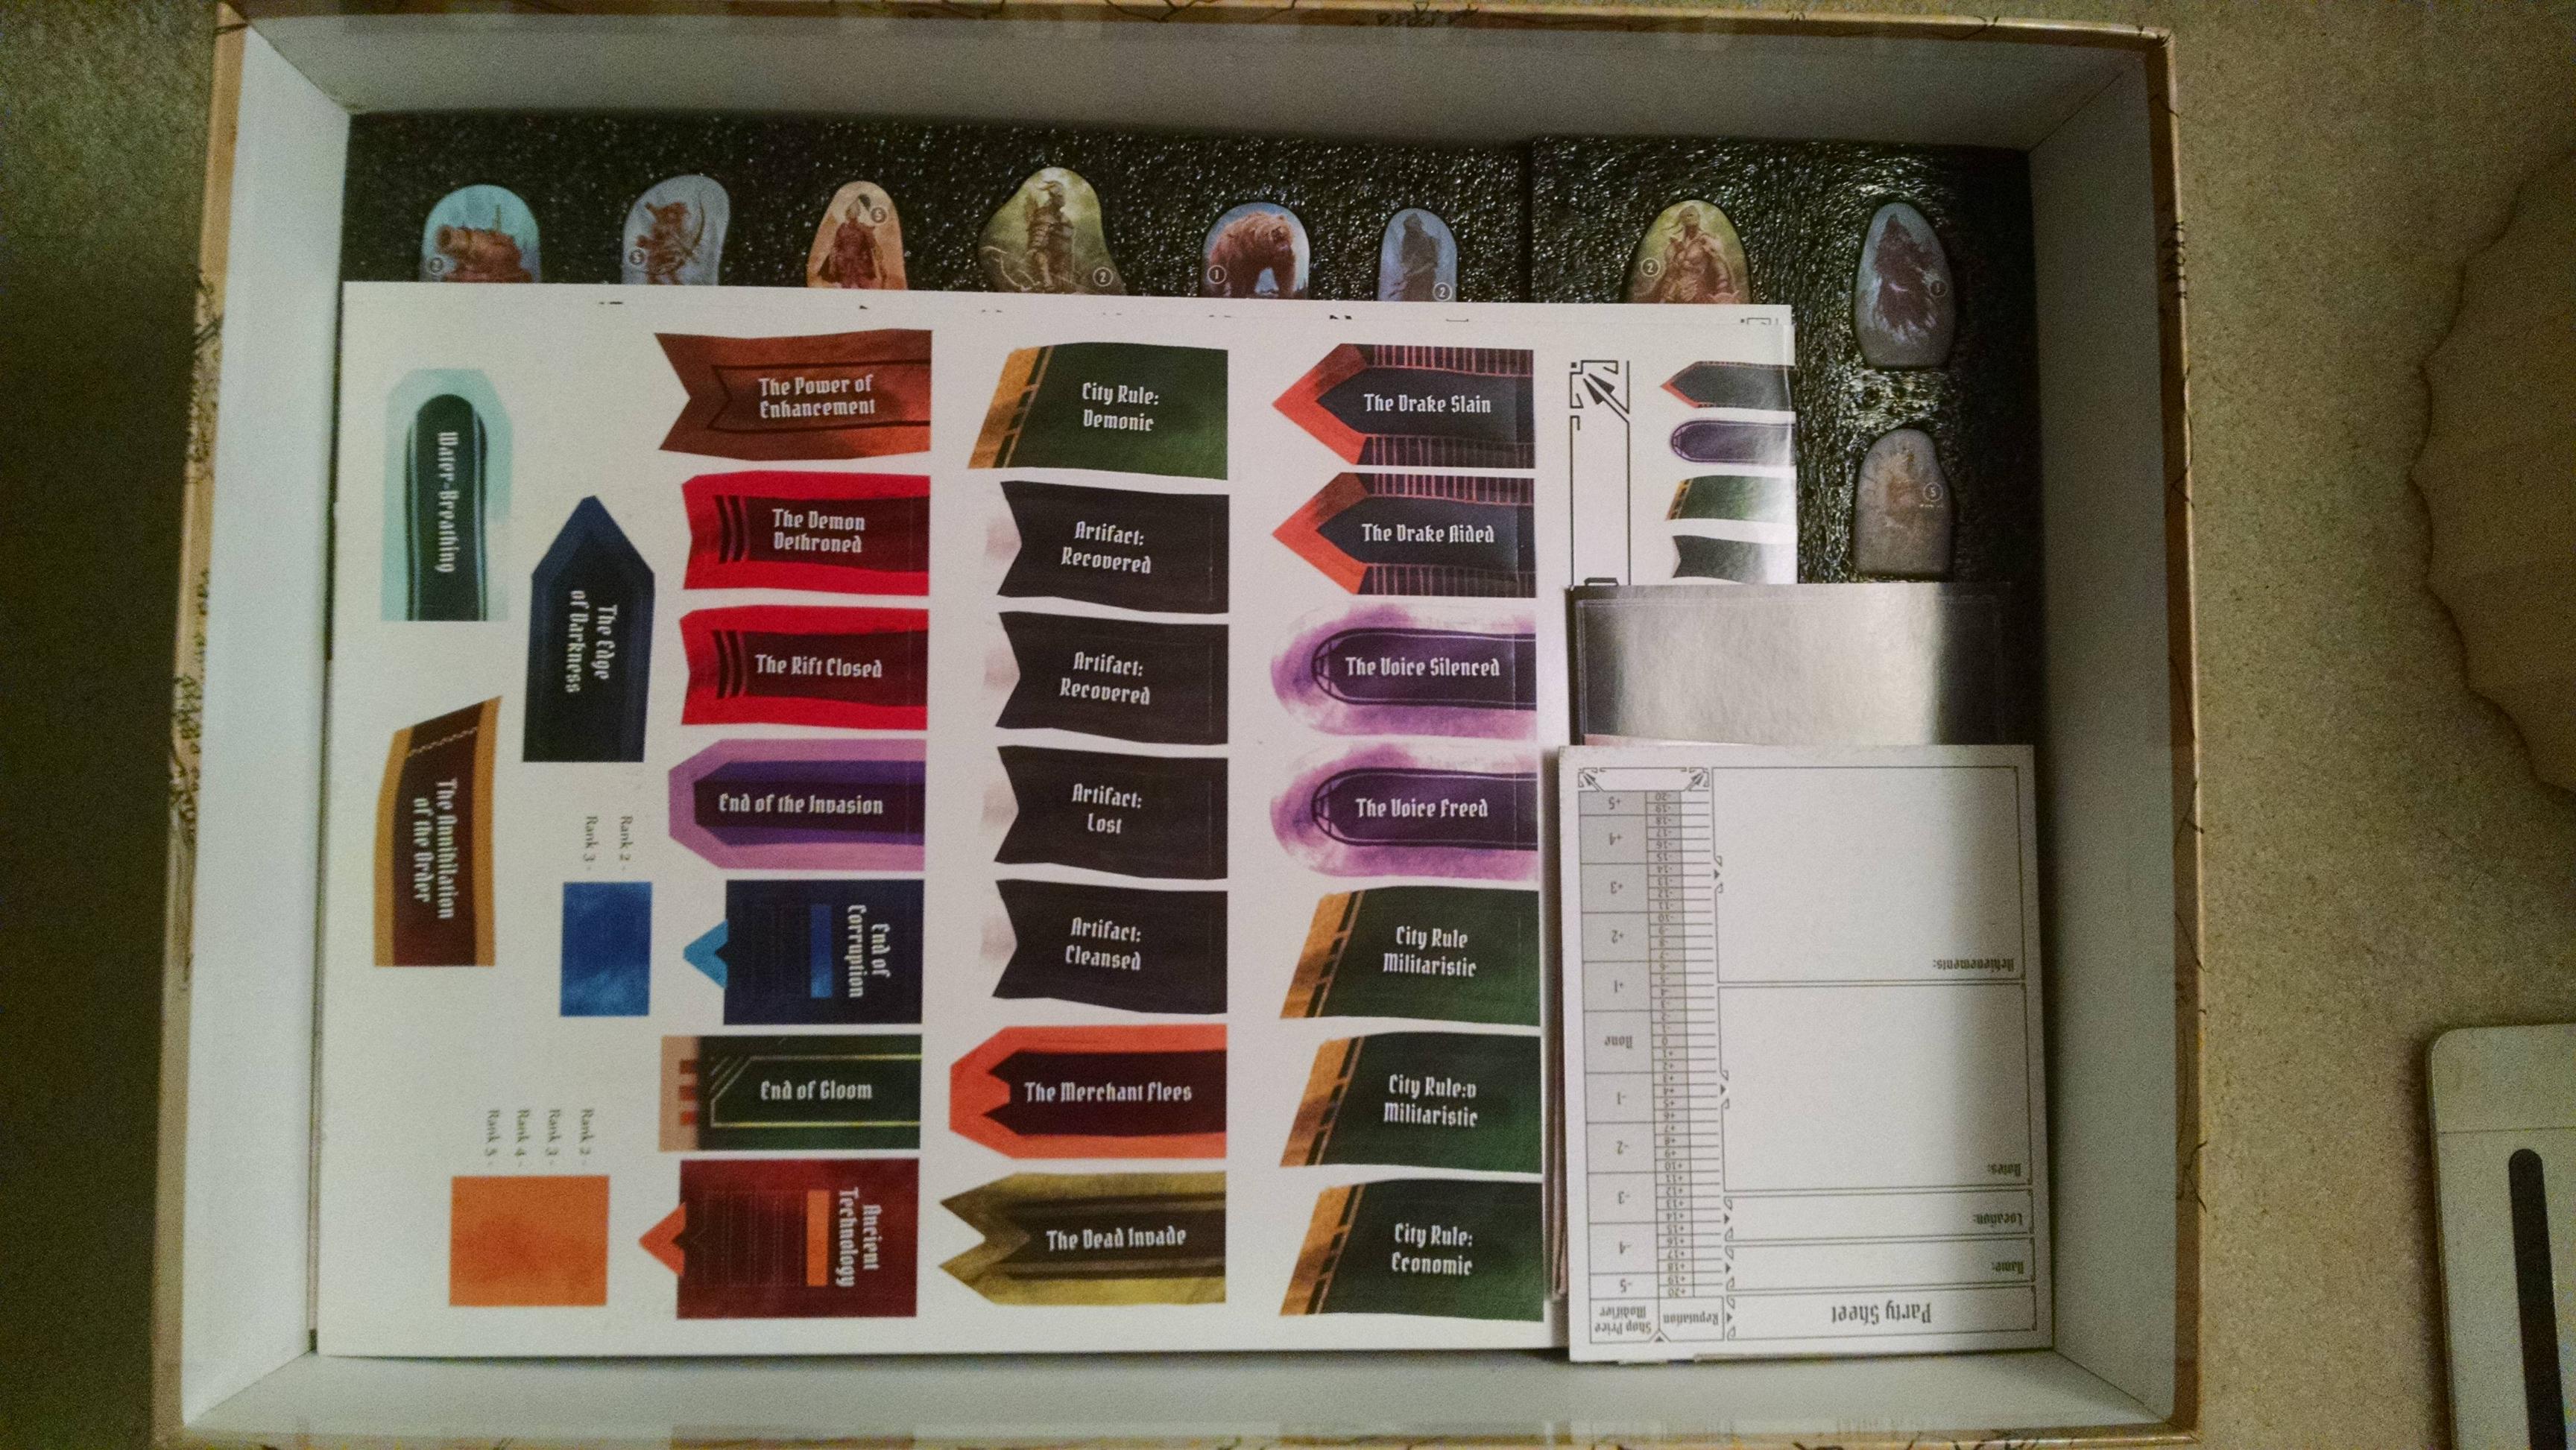 How to organize straight out of the box?